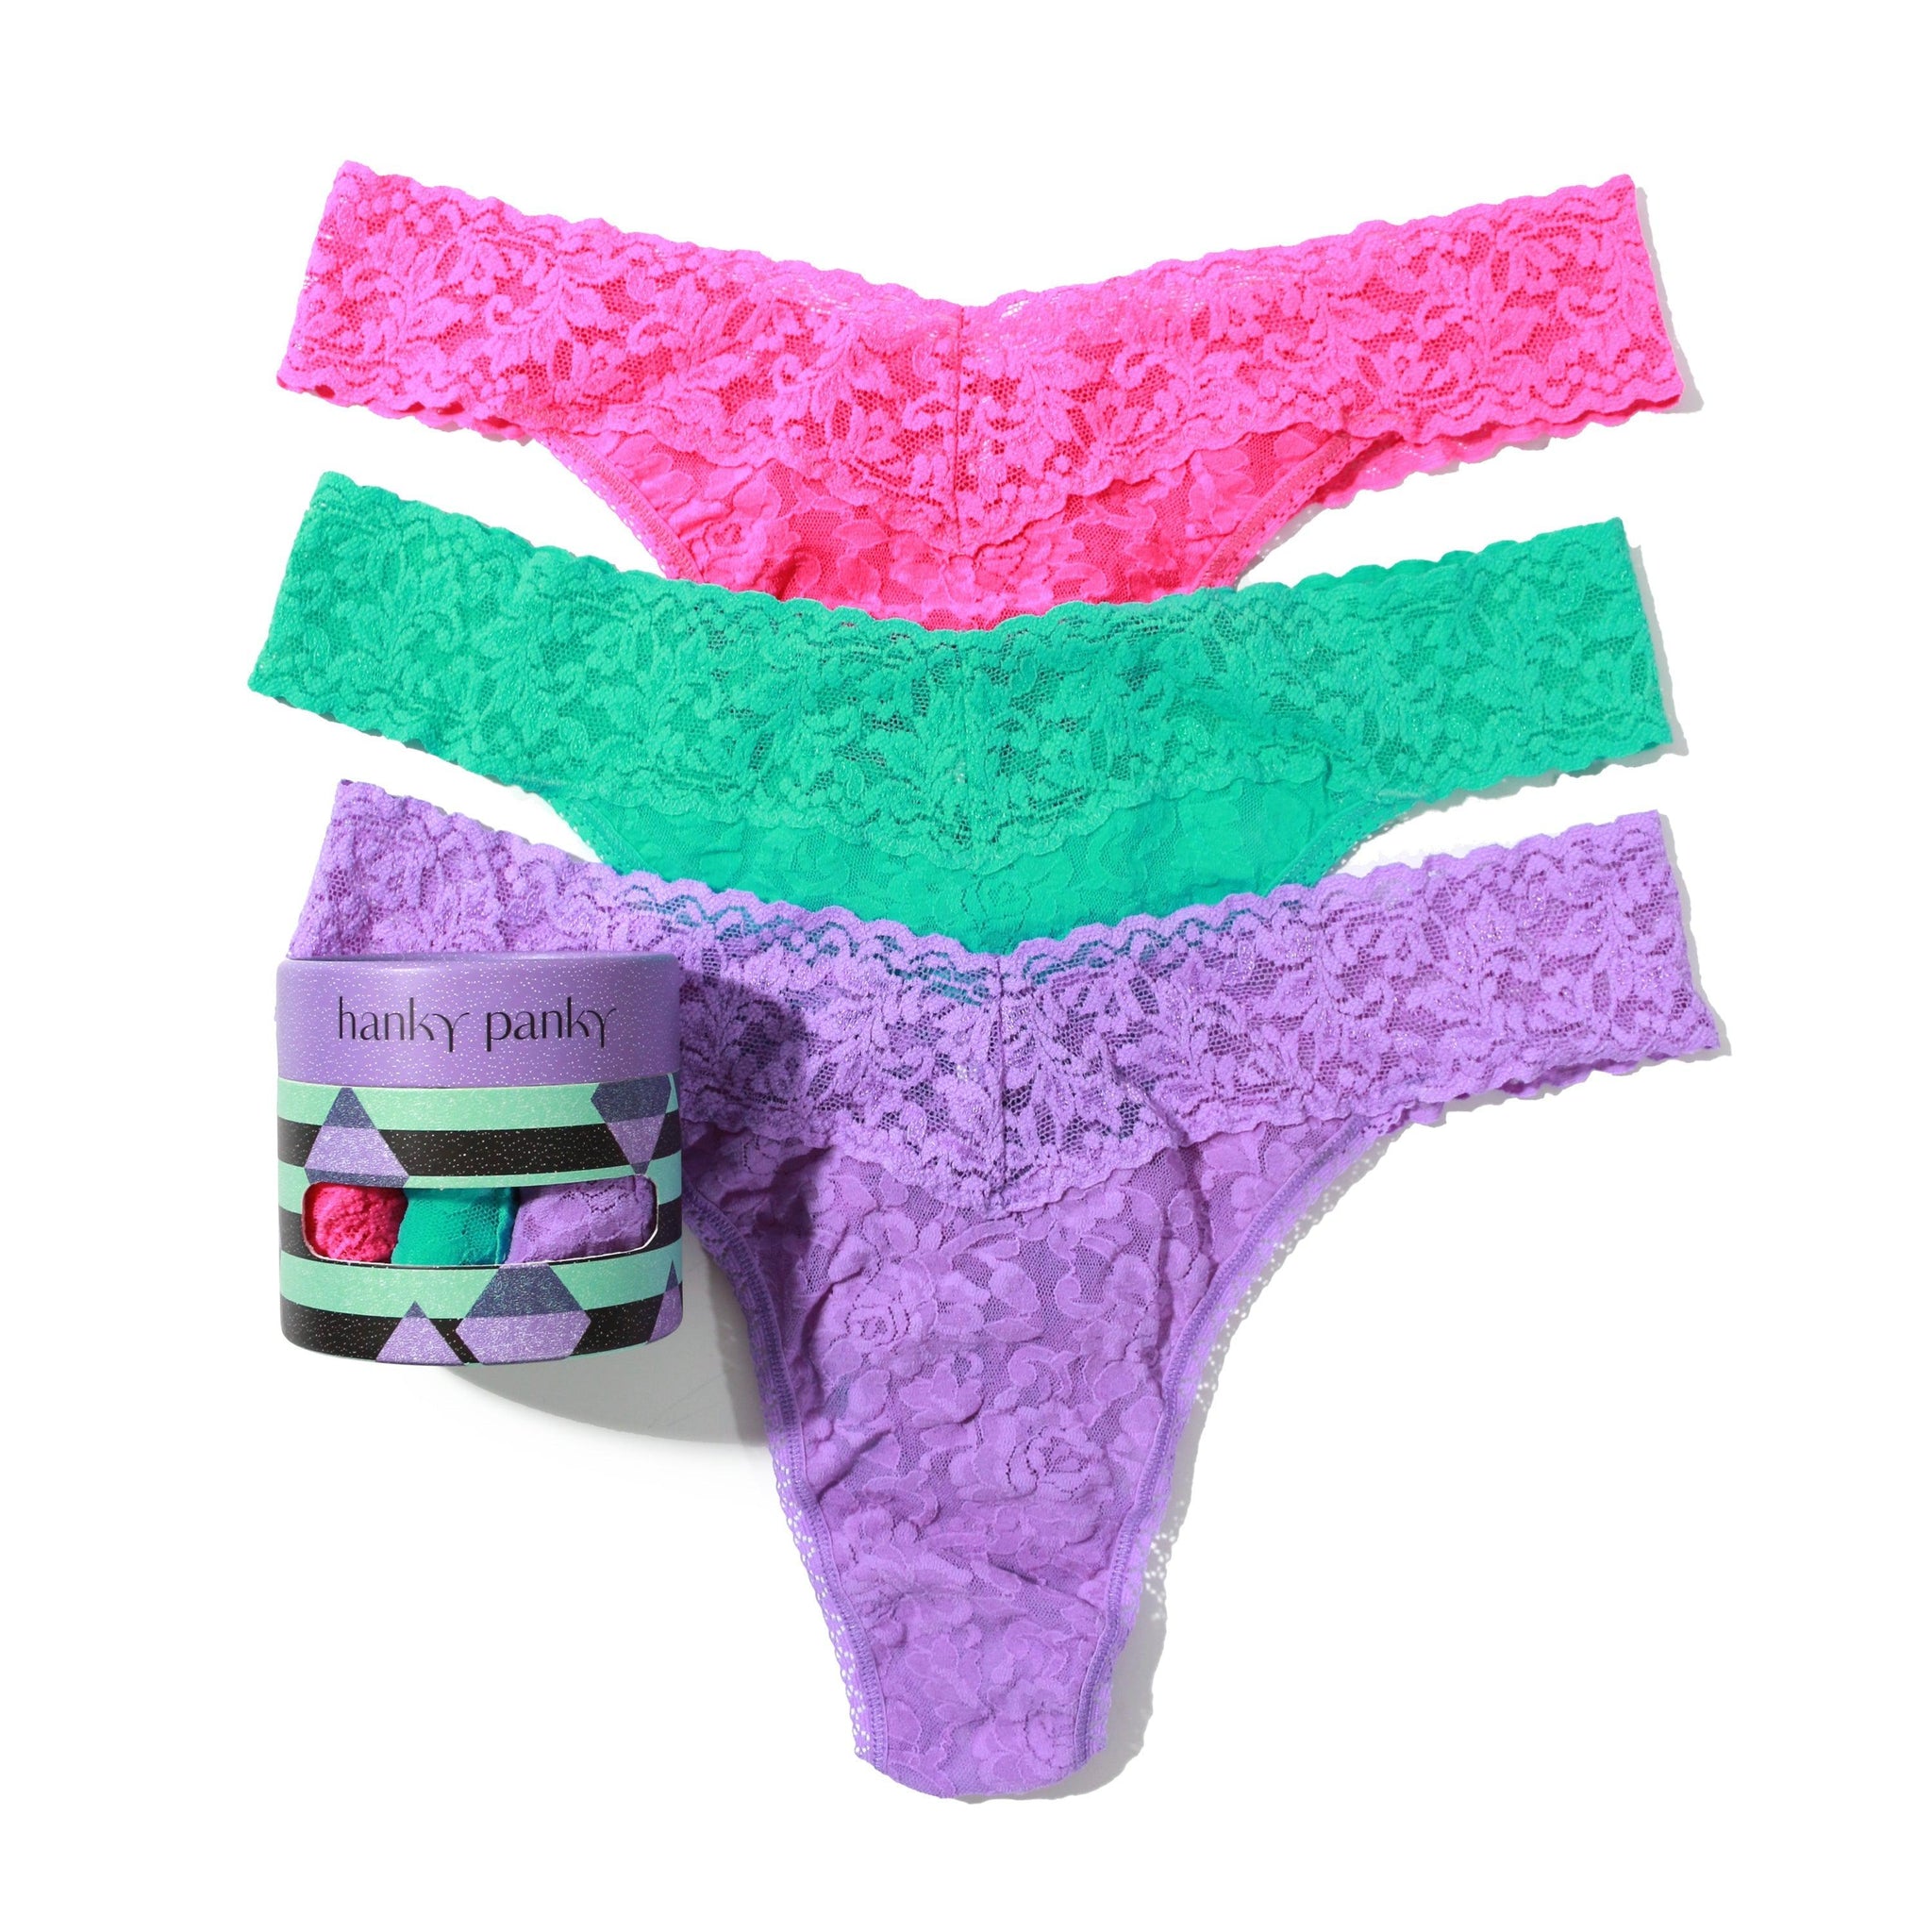 15% Off Hanky Panky Coupons, Promo Codes, Deals